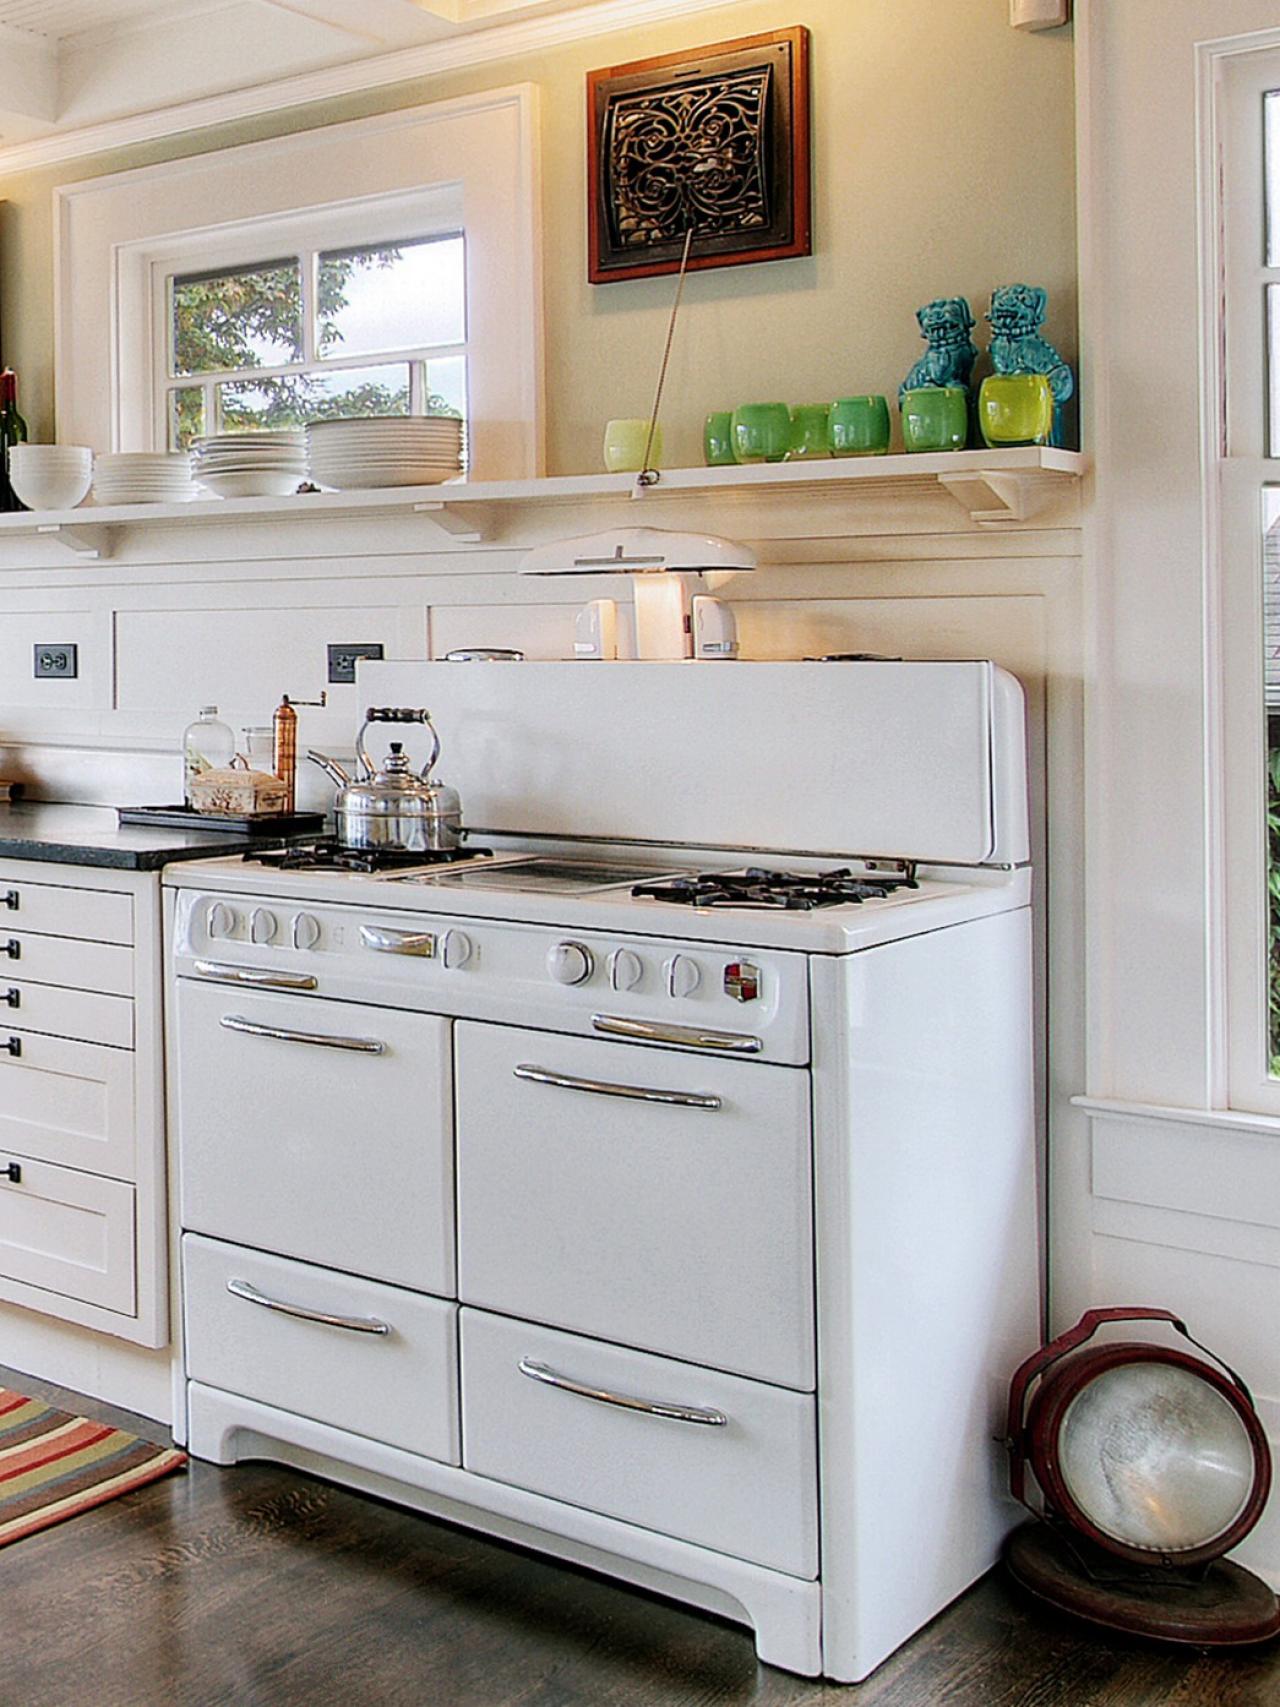 remodeling your kitchen with salvaged items | diy